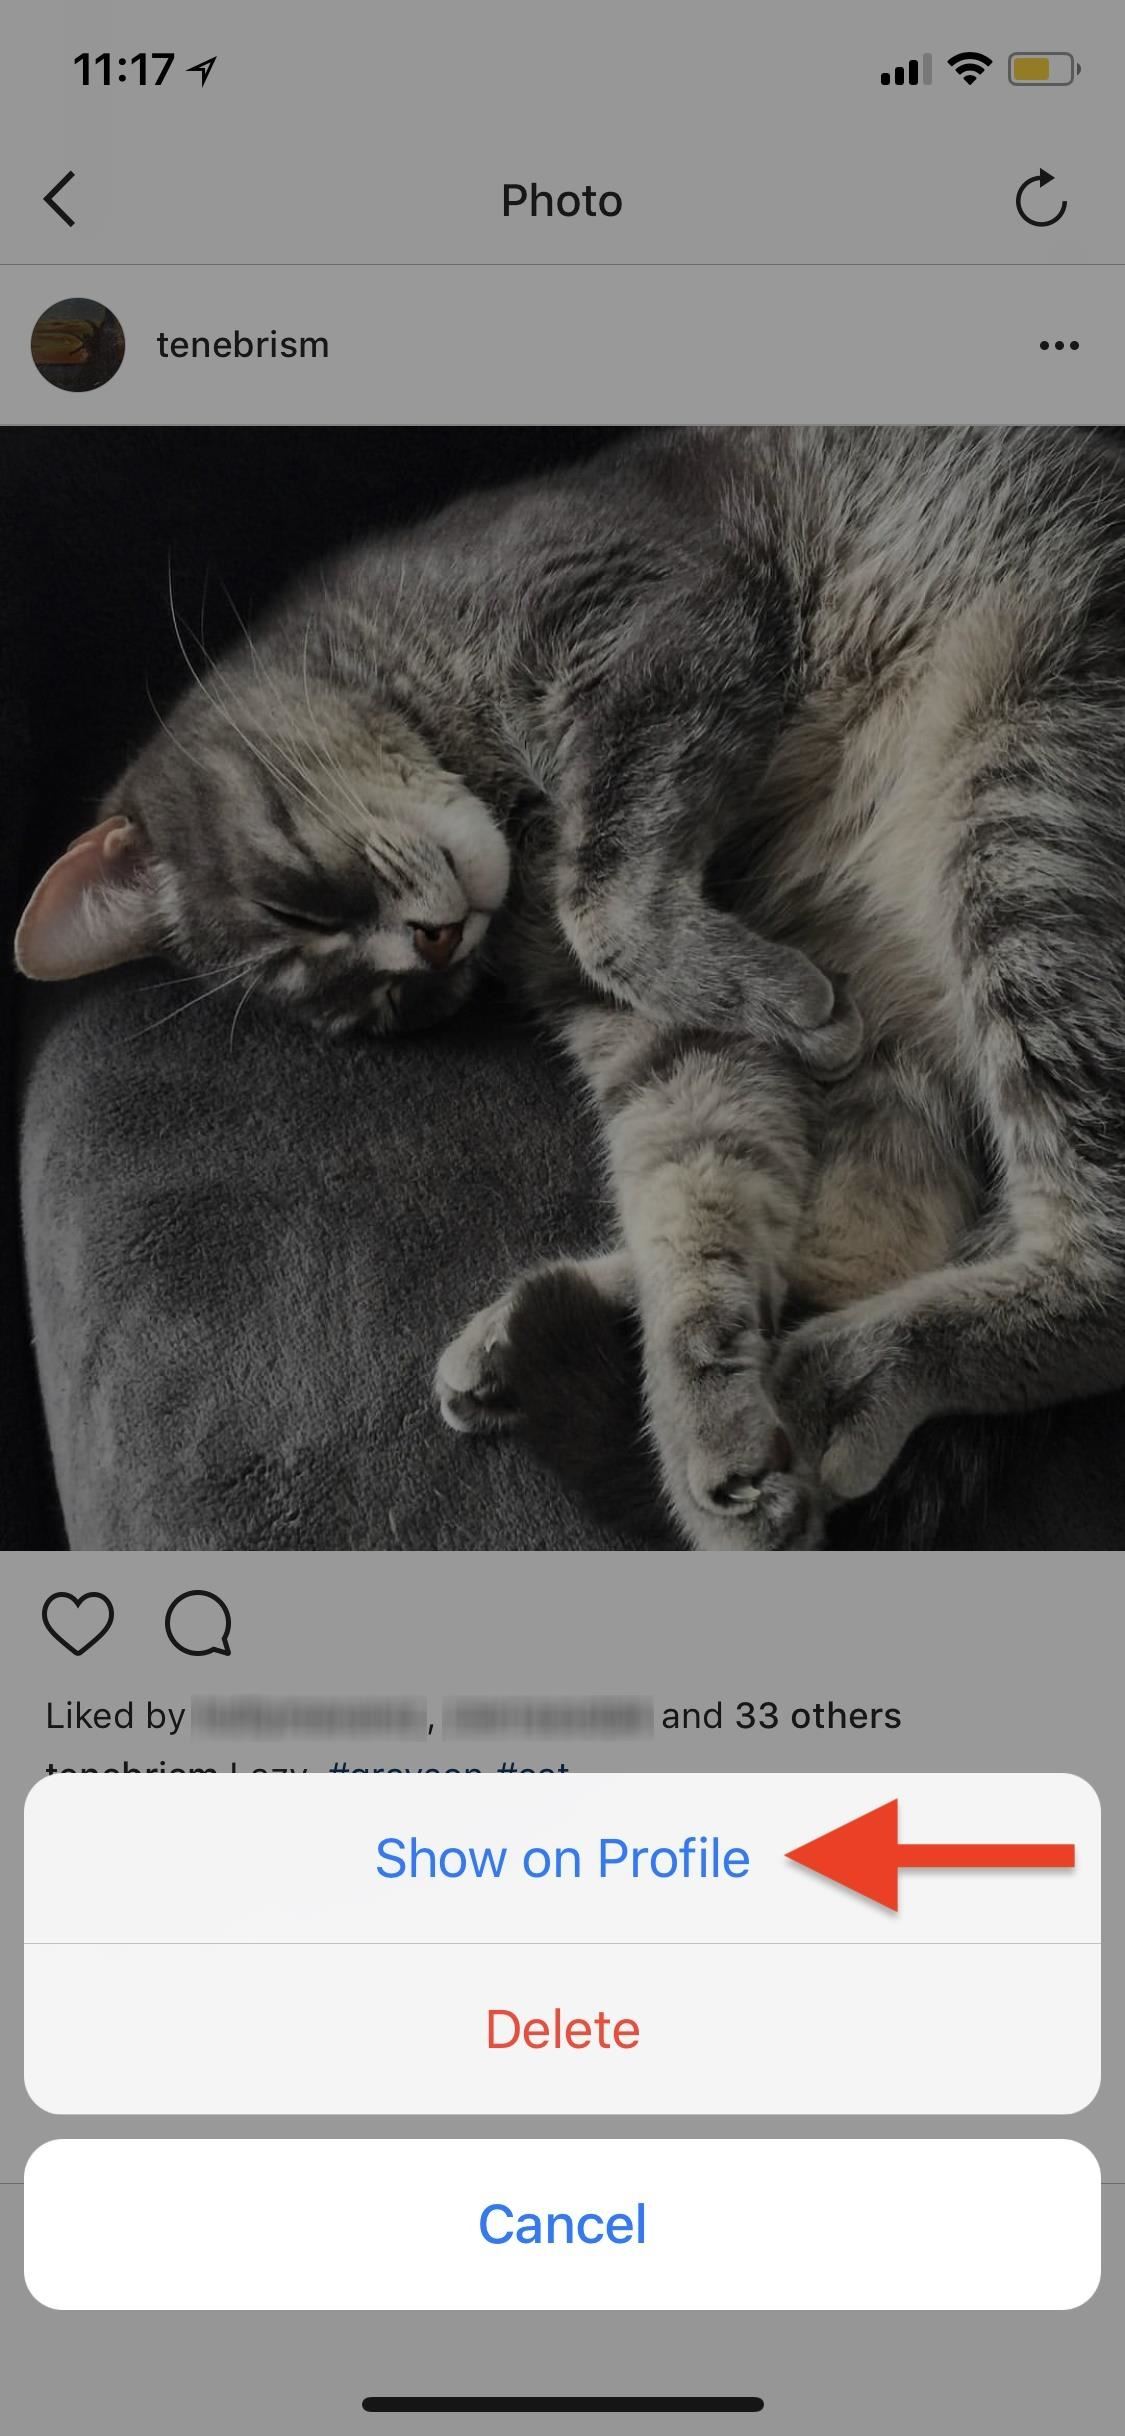 Instagram 101: How to Unarchive Posts to Make Them Visible to Other Users Again